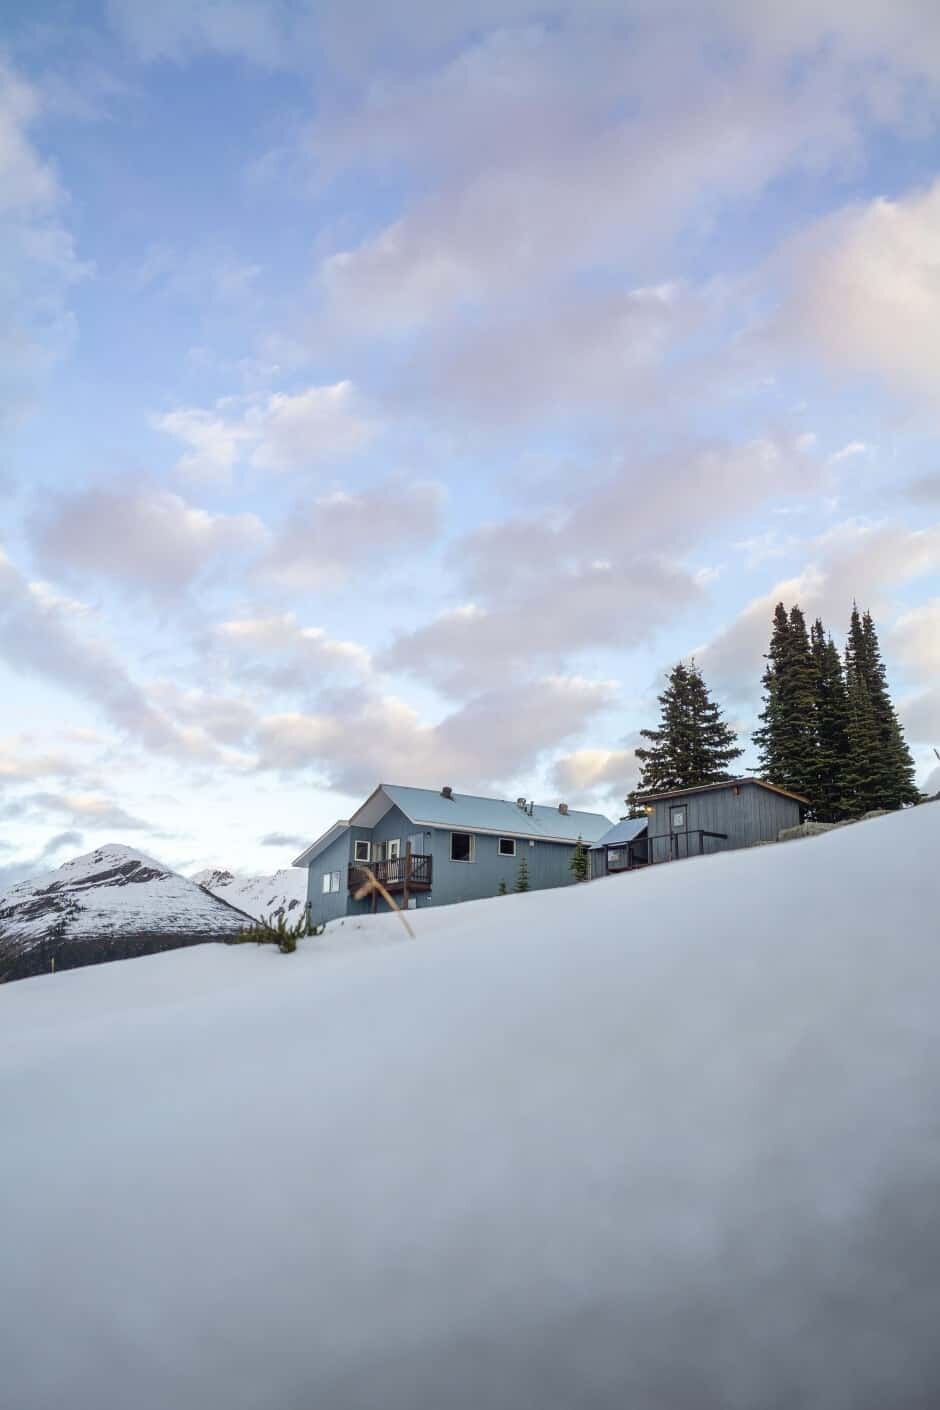 Purcell Mountain Lodge, Golden British Columbia, Canada